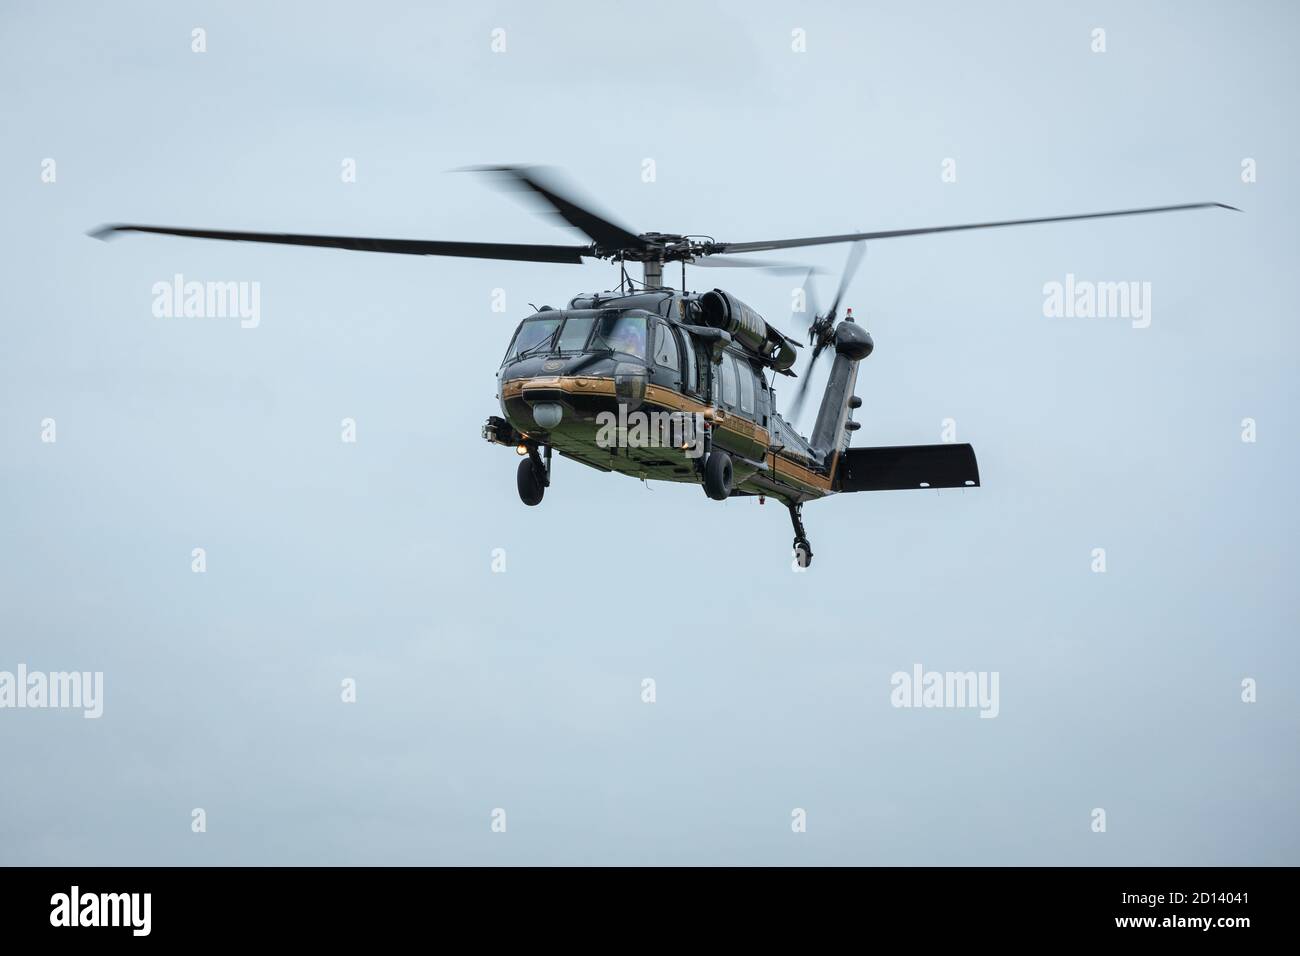 CBP Air and Marine Operations aircrews arrive in Louisiana, on August 26, 2020, ahead of Hurricane Laura making landfall. The aircrews are staging in preparation for possible search and rescue operations. Stock Photo